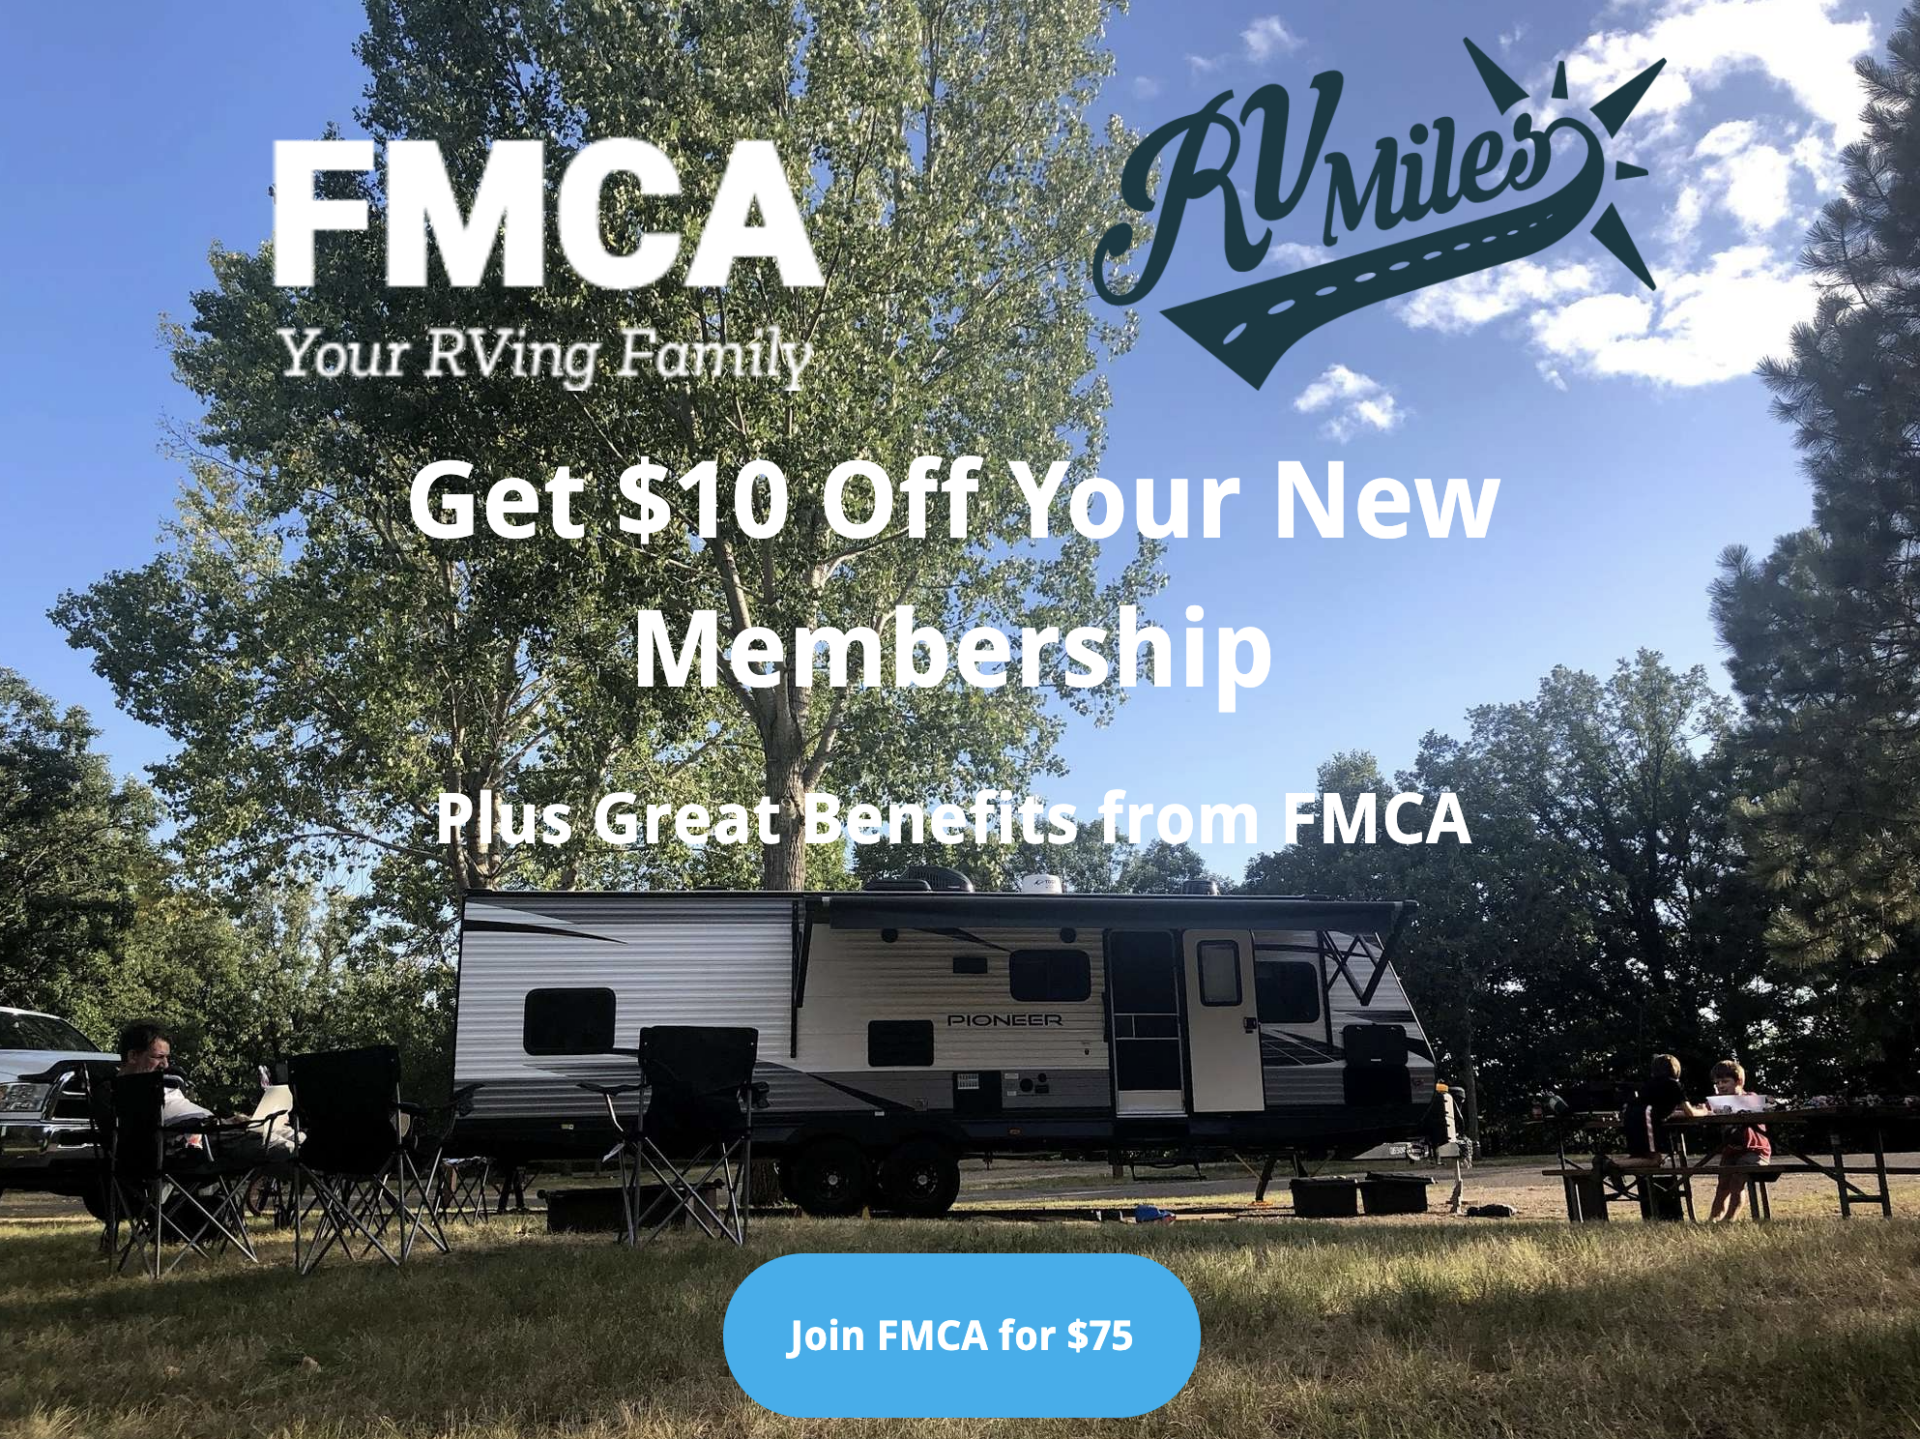 Save $10 on an FMCA Membership with Promo Code